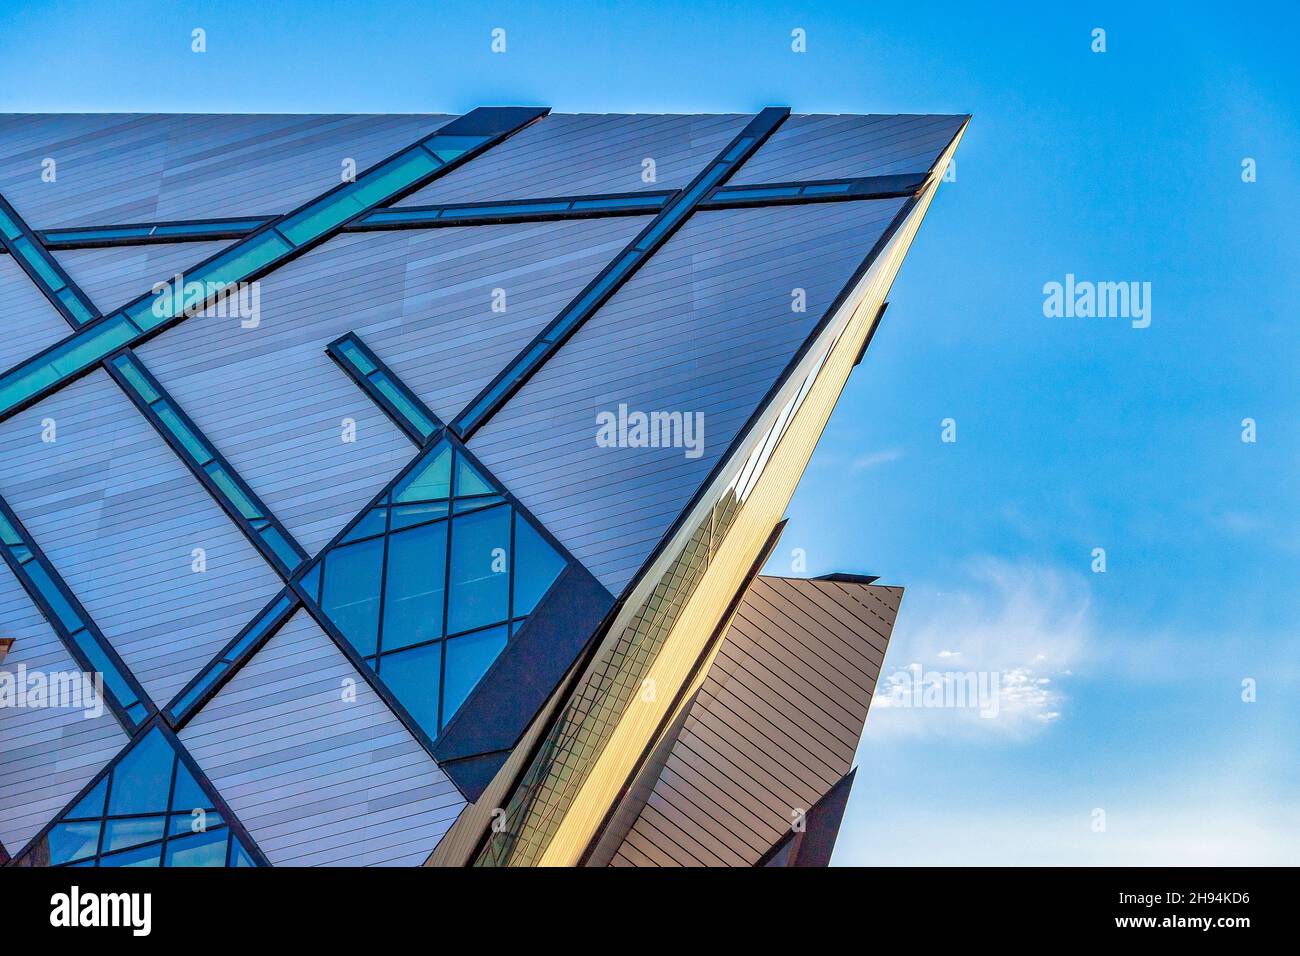 Royal Ontario Museum or ROM close up detail of the Libeskind glass facade. Nov. 22, 2021 Stock Photo